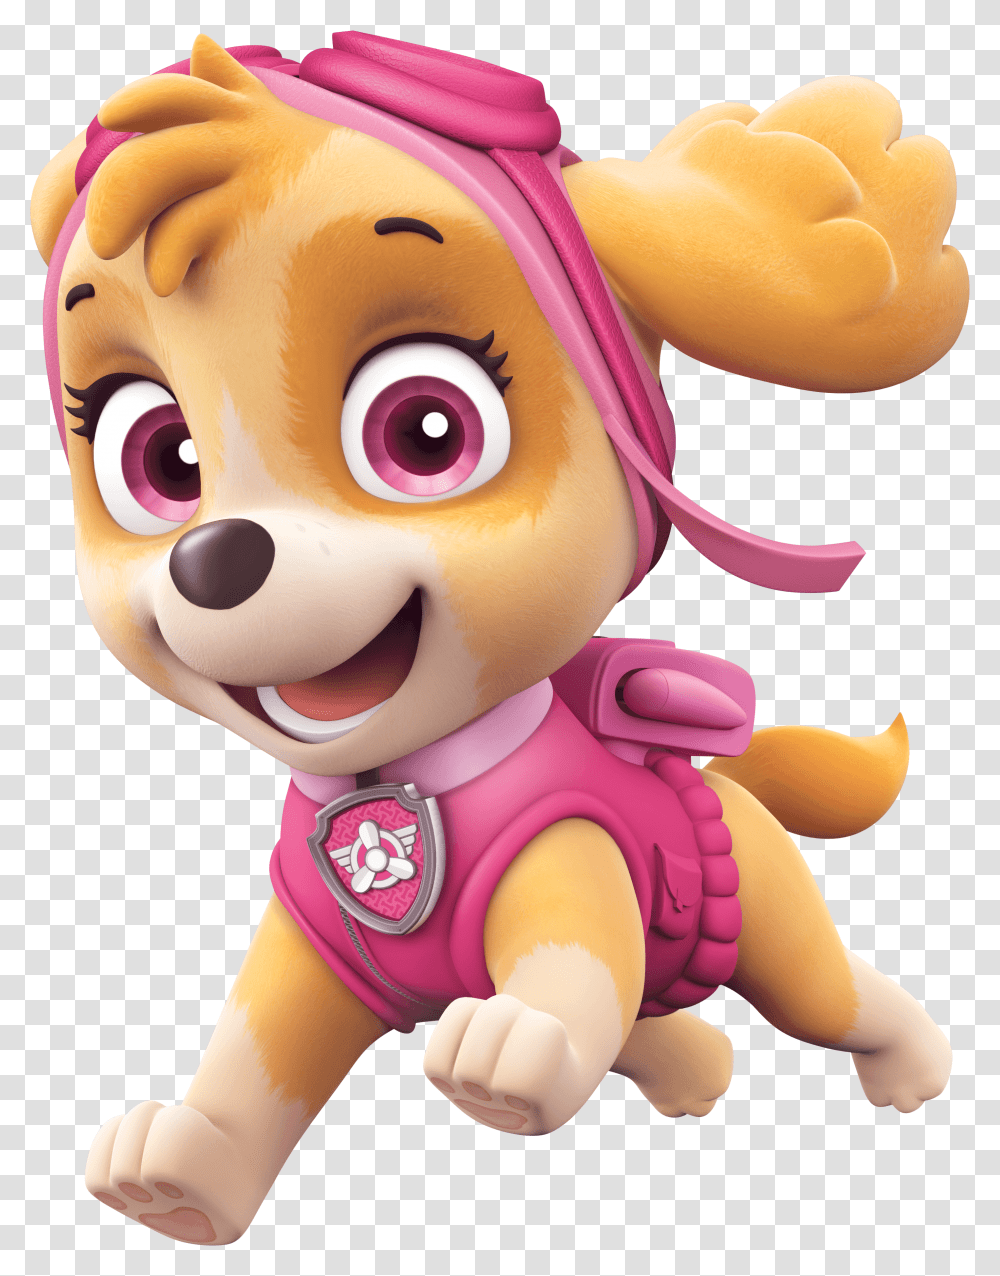 Pink Dog Bone Clipart Skye Paw Patrol Characters, Doll, Toy, Figurine Transparent Png